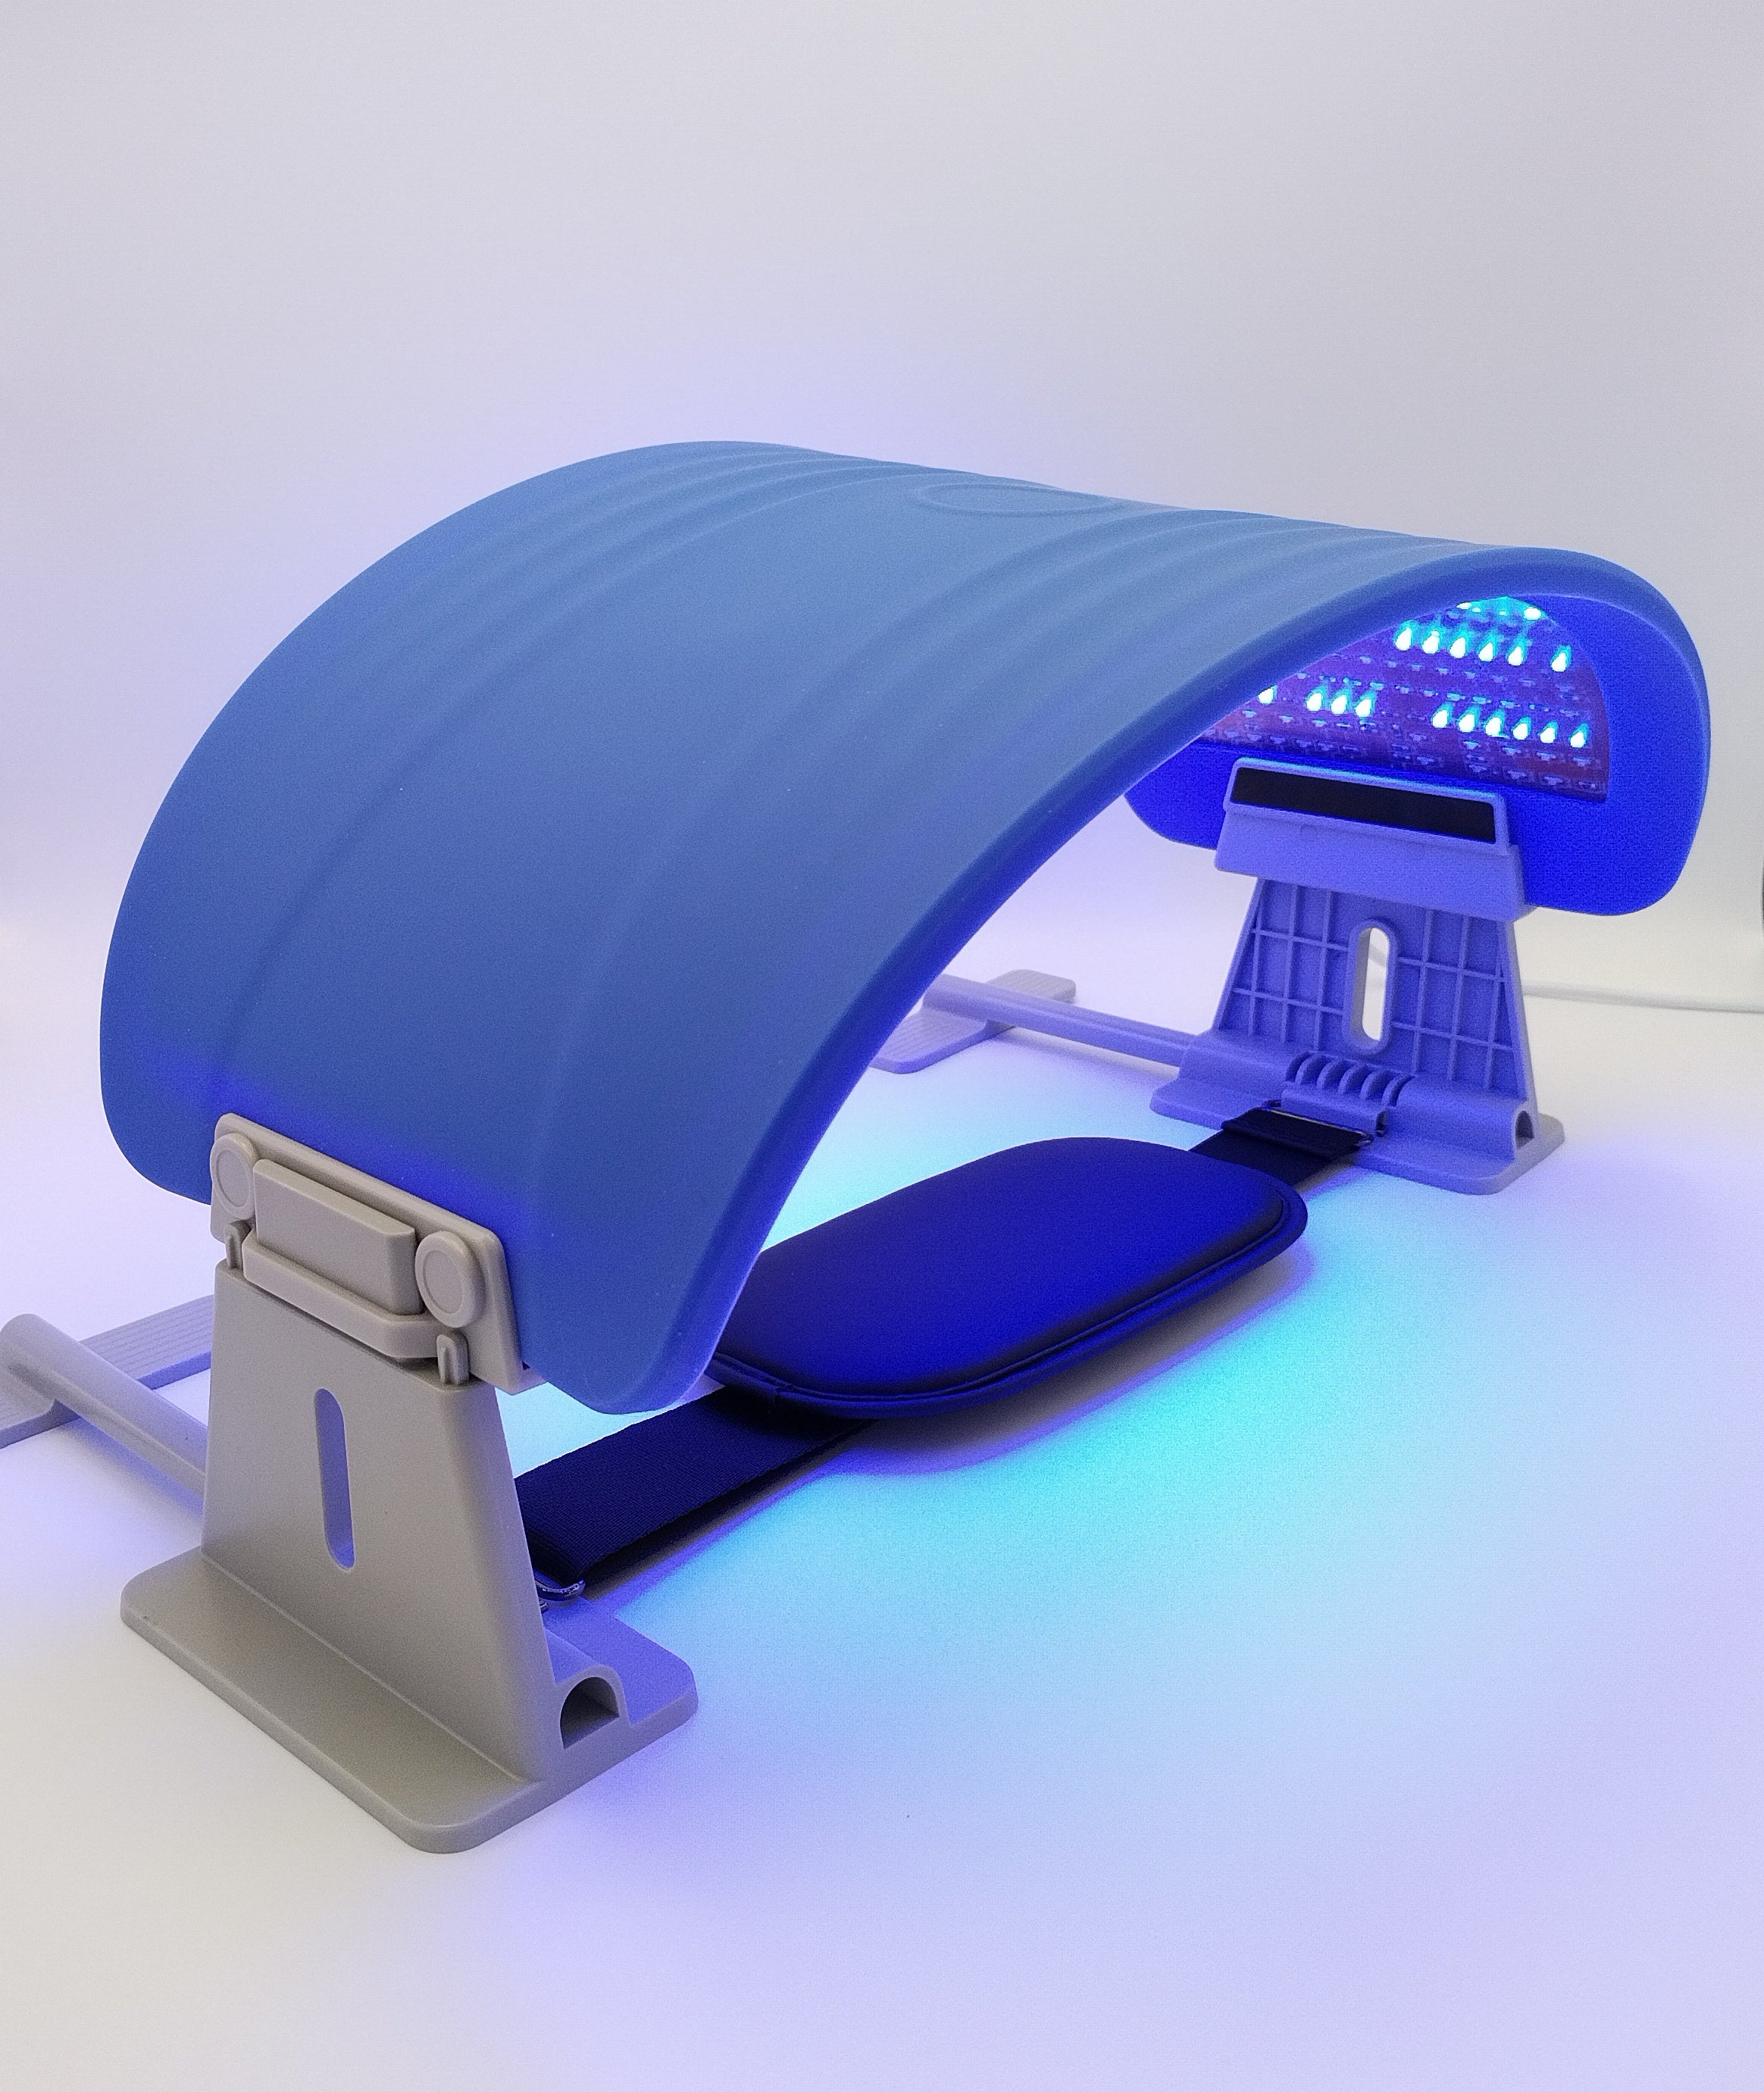 Three color led light therapy device for skin care (improve skin texture, reduce wrinkles and redness caused by rosacea or other skin conditions)